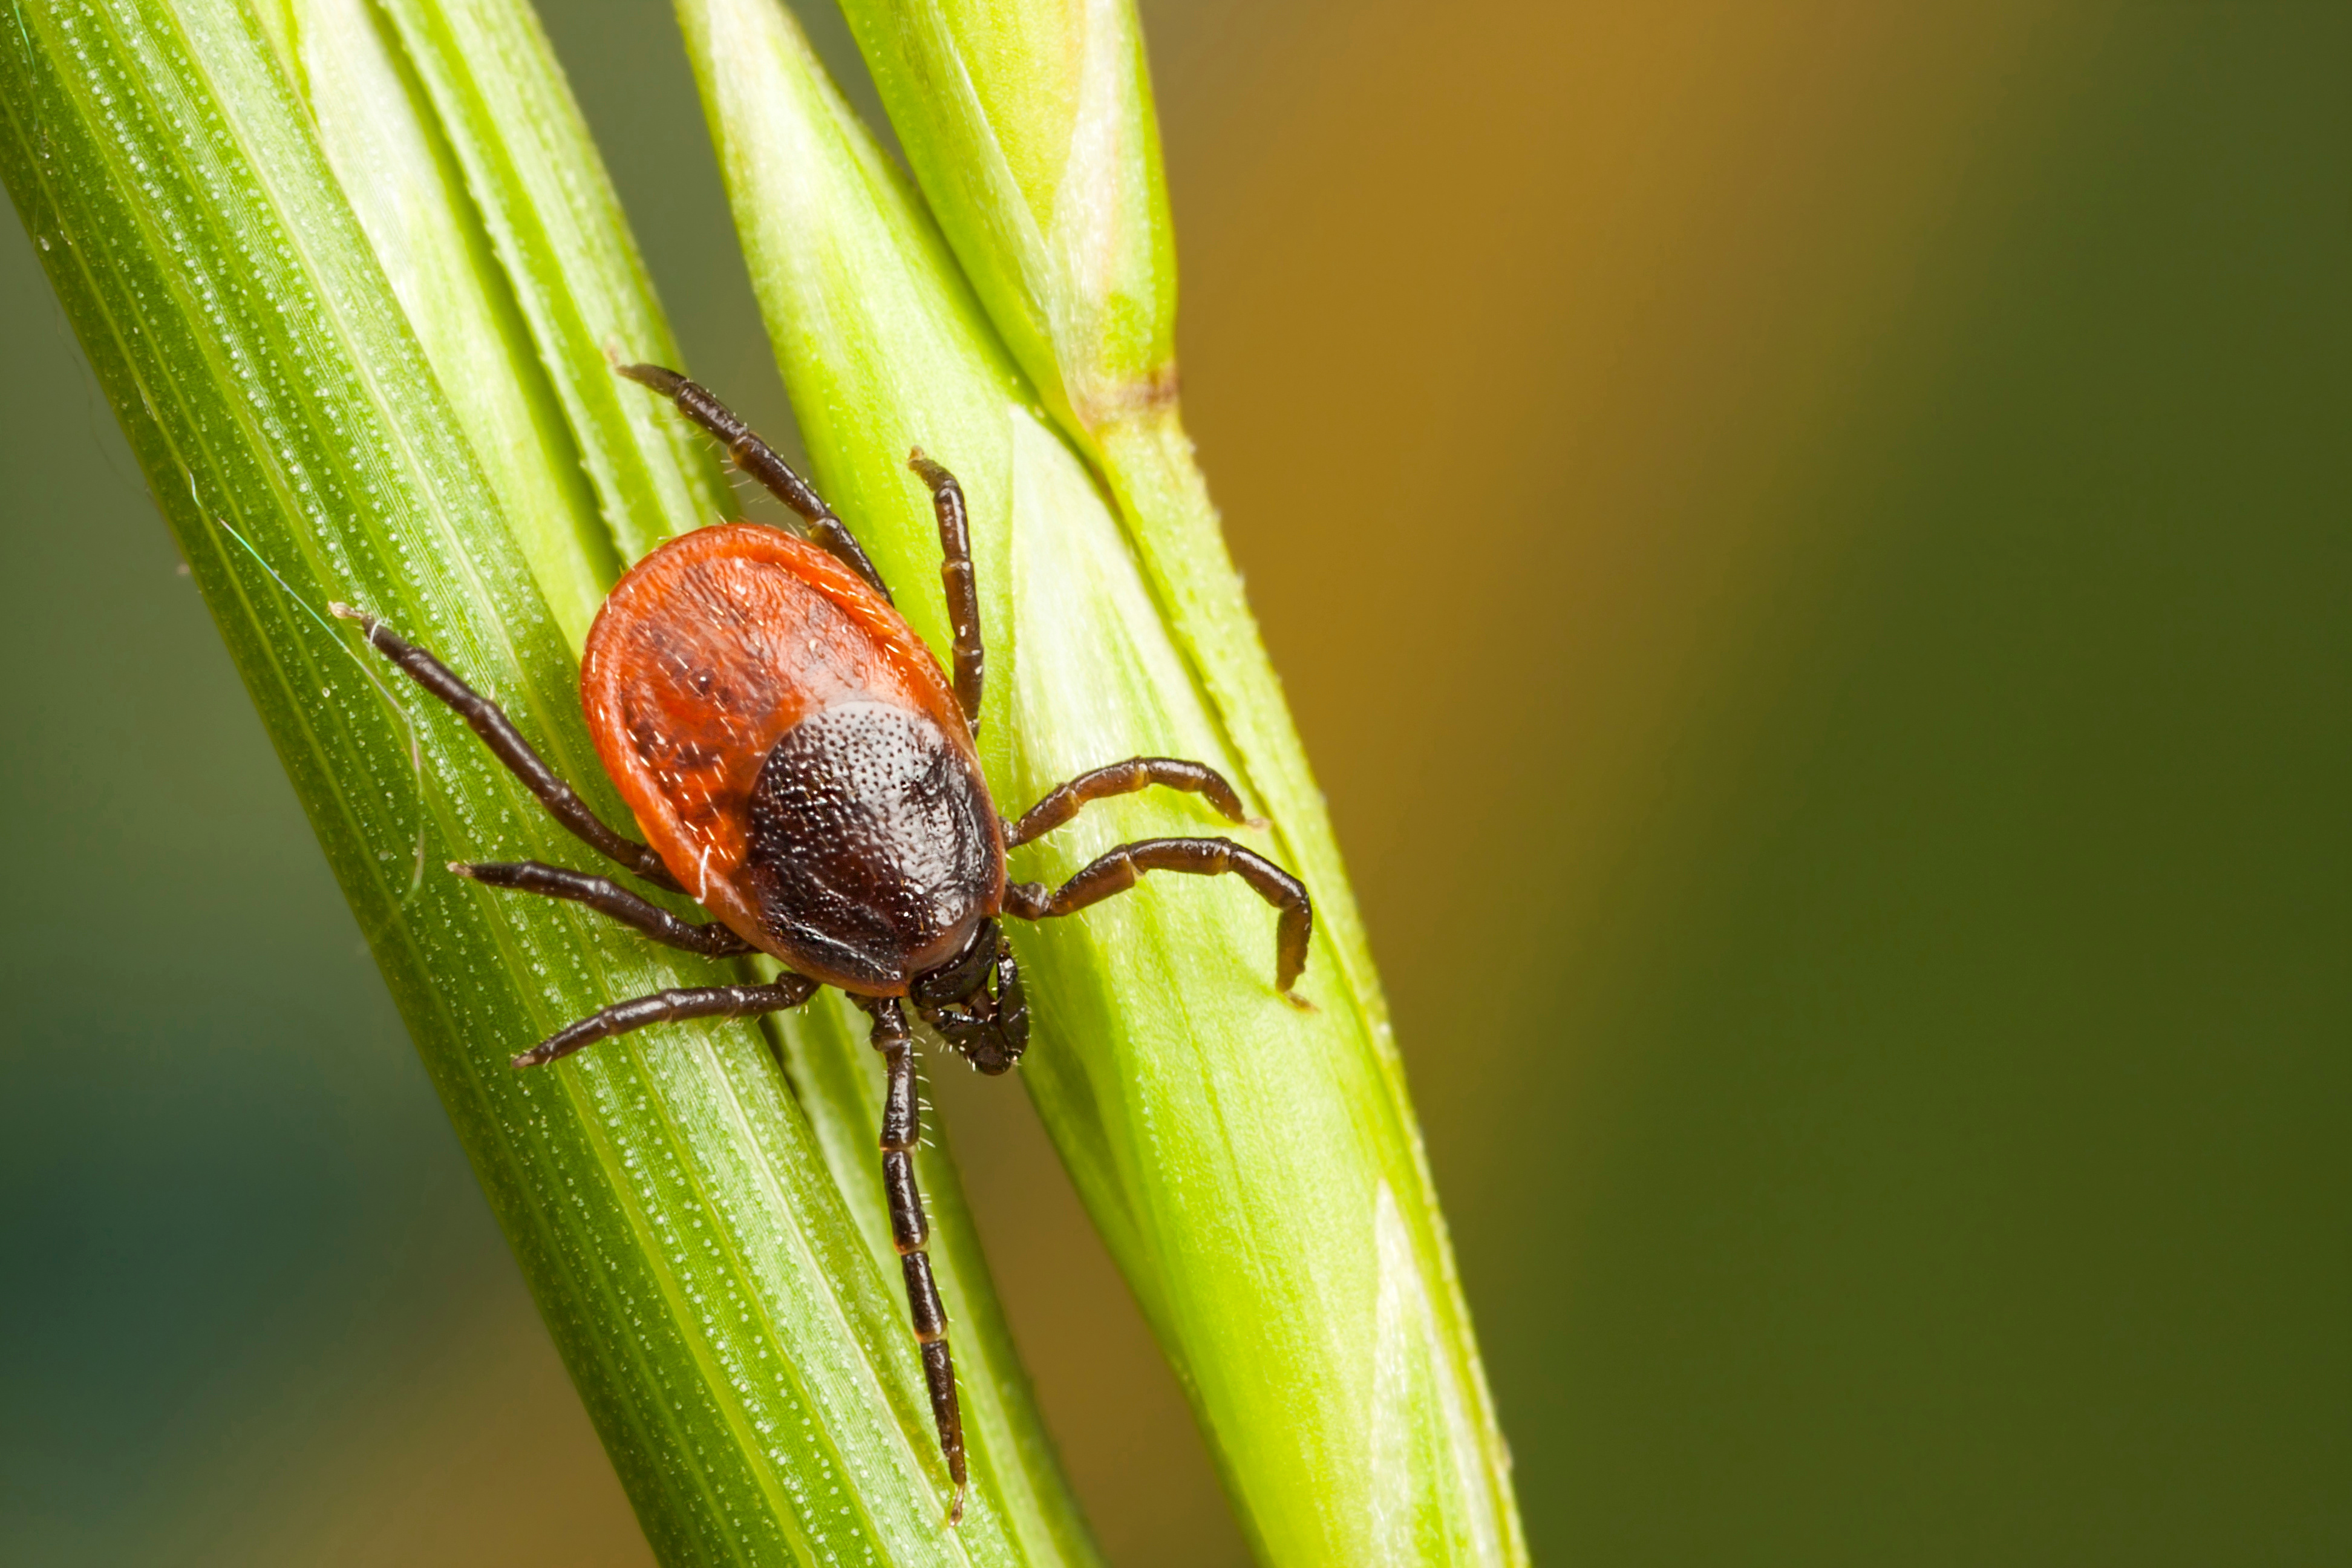 A tick on a leaf - do you need tick pest control? Contact GGA Pest Management today!